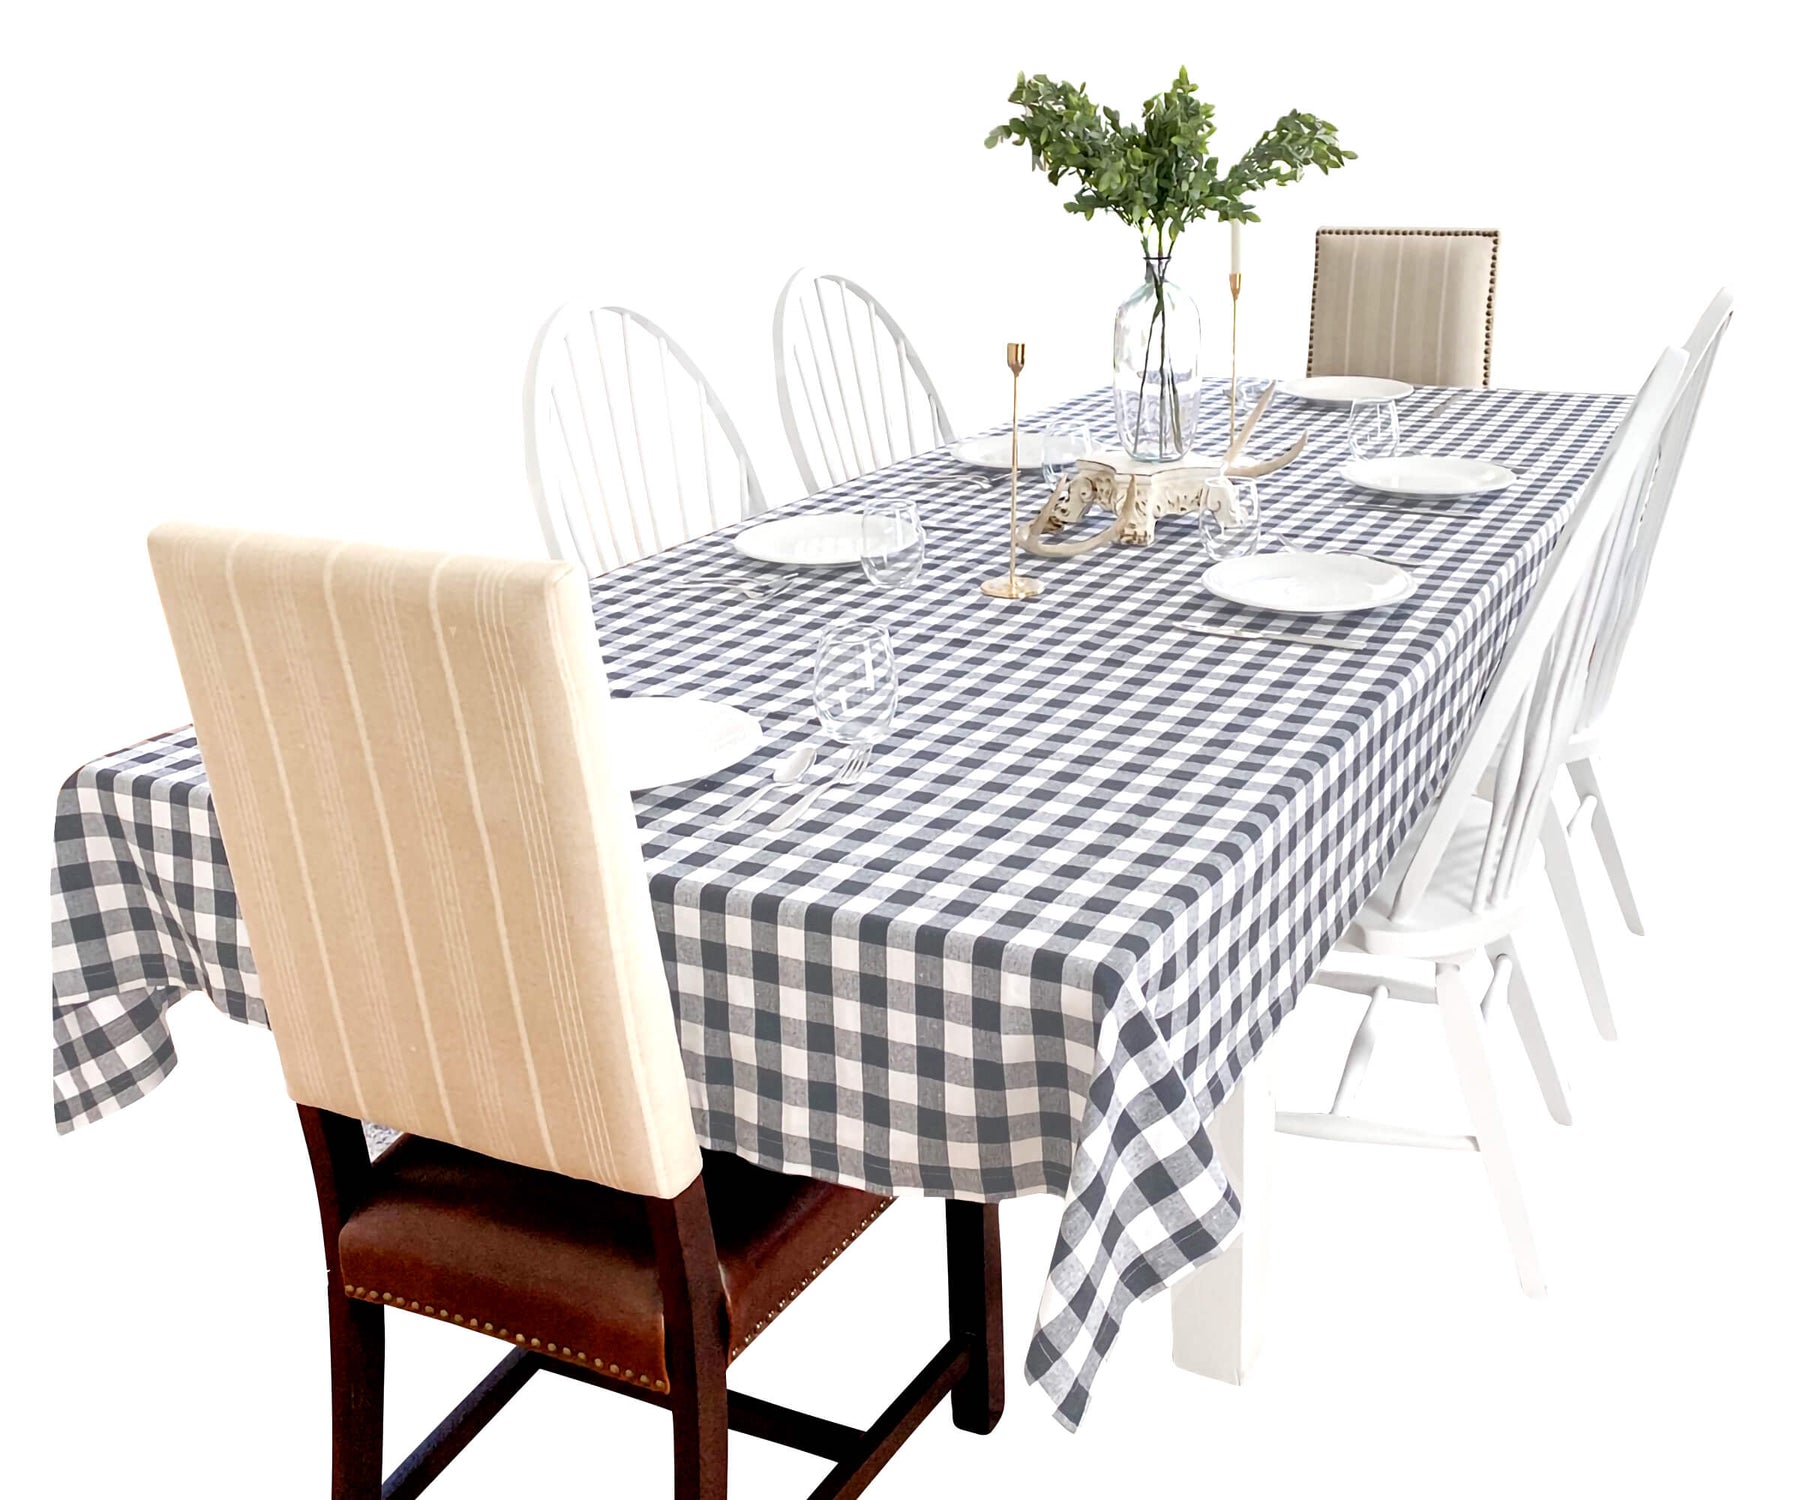 The table is adorned with a buffalo check tablecloth, a green plaid tablecloth, a tablecloth with a plaid pattern, and a classic black and white plaid tablecloth, offering a charming blend of styles.